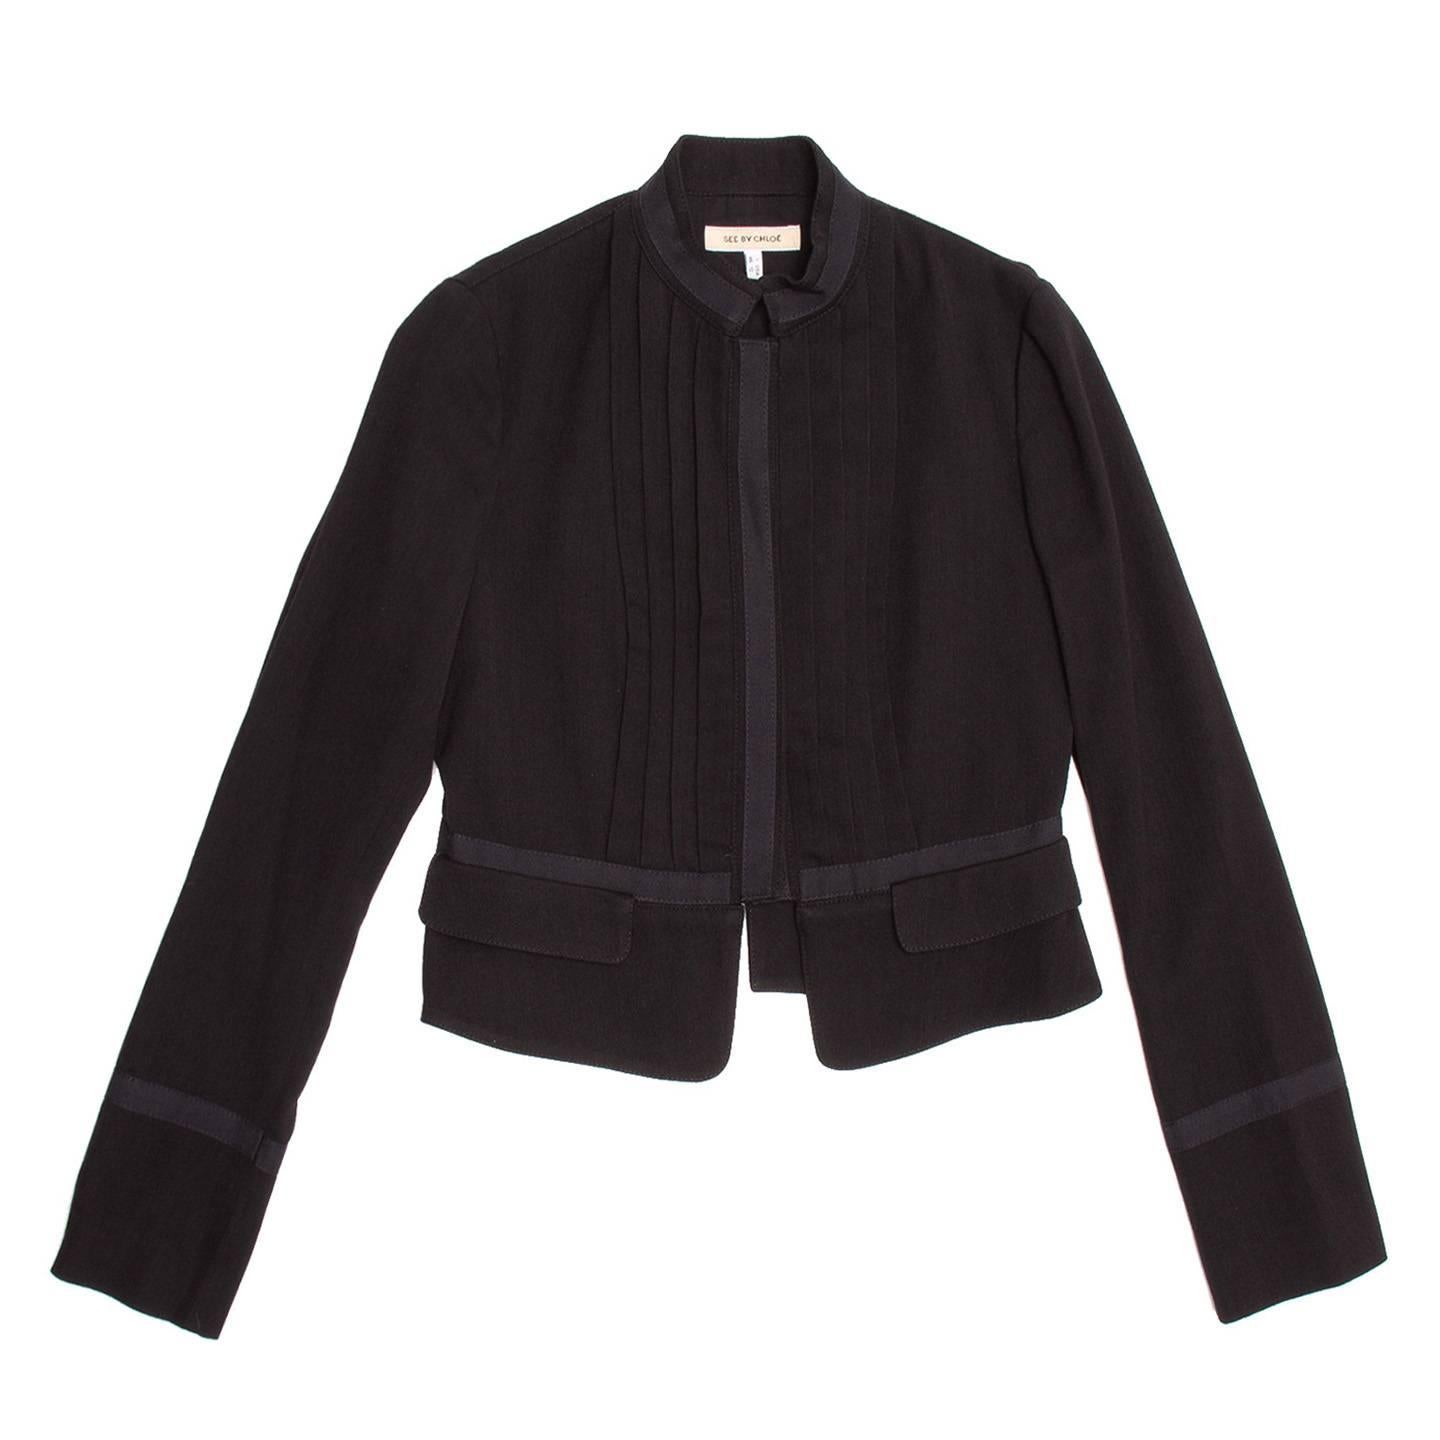 Black wool/cotton cropped bellboy style jacket with pleated front detail and tone-on-tone binding on neck, cuffs, waist line, front opening and back seams. The jacket fastens at center front with concealed metal snap buttons.

Size  46 Italian